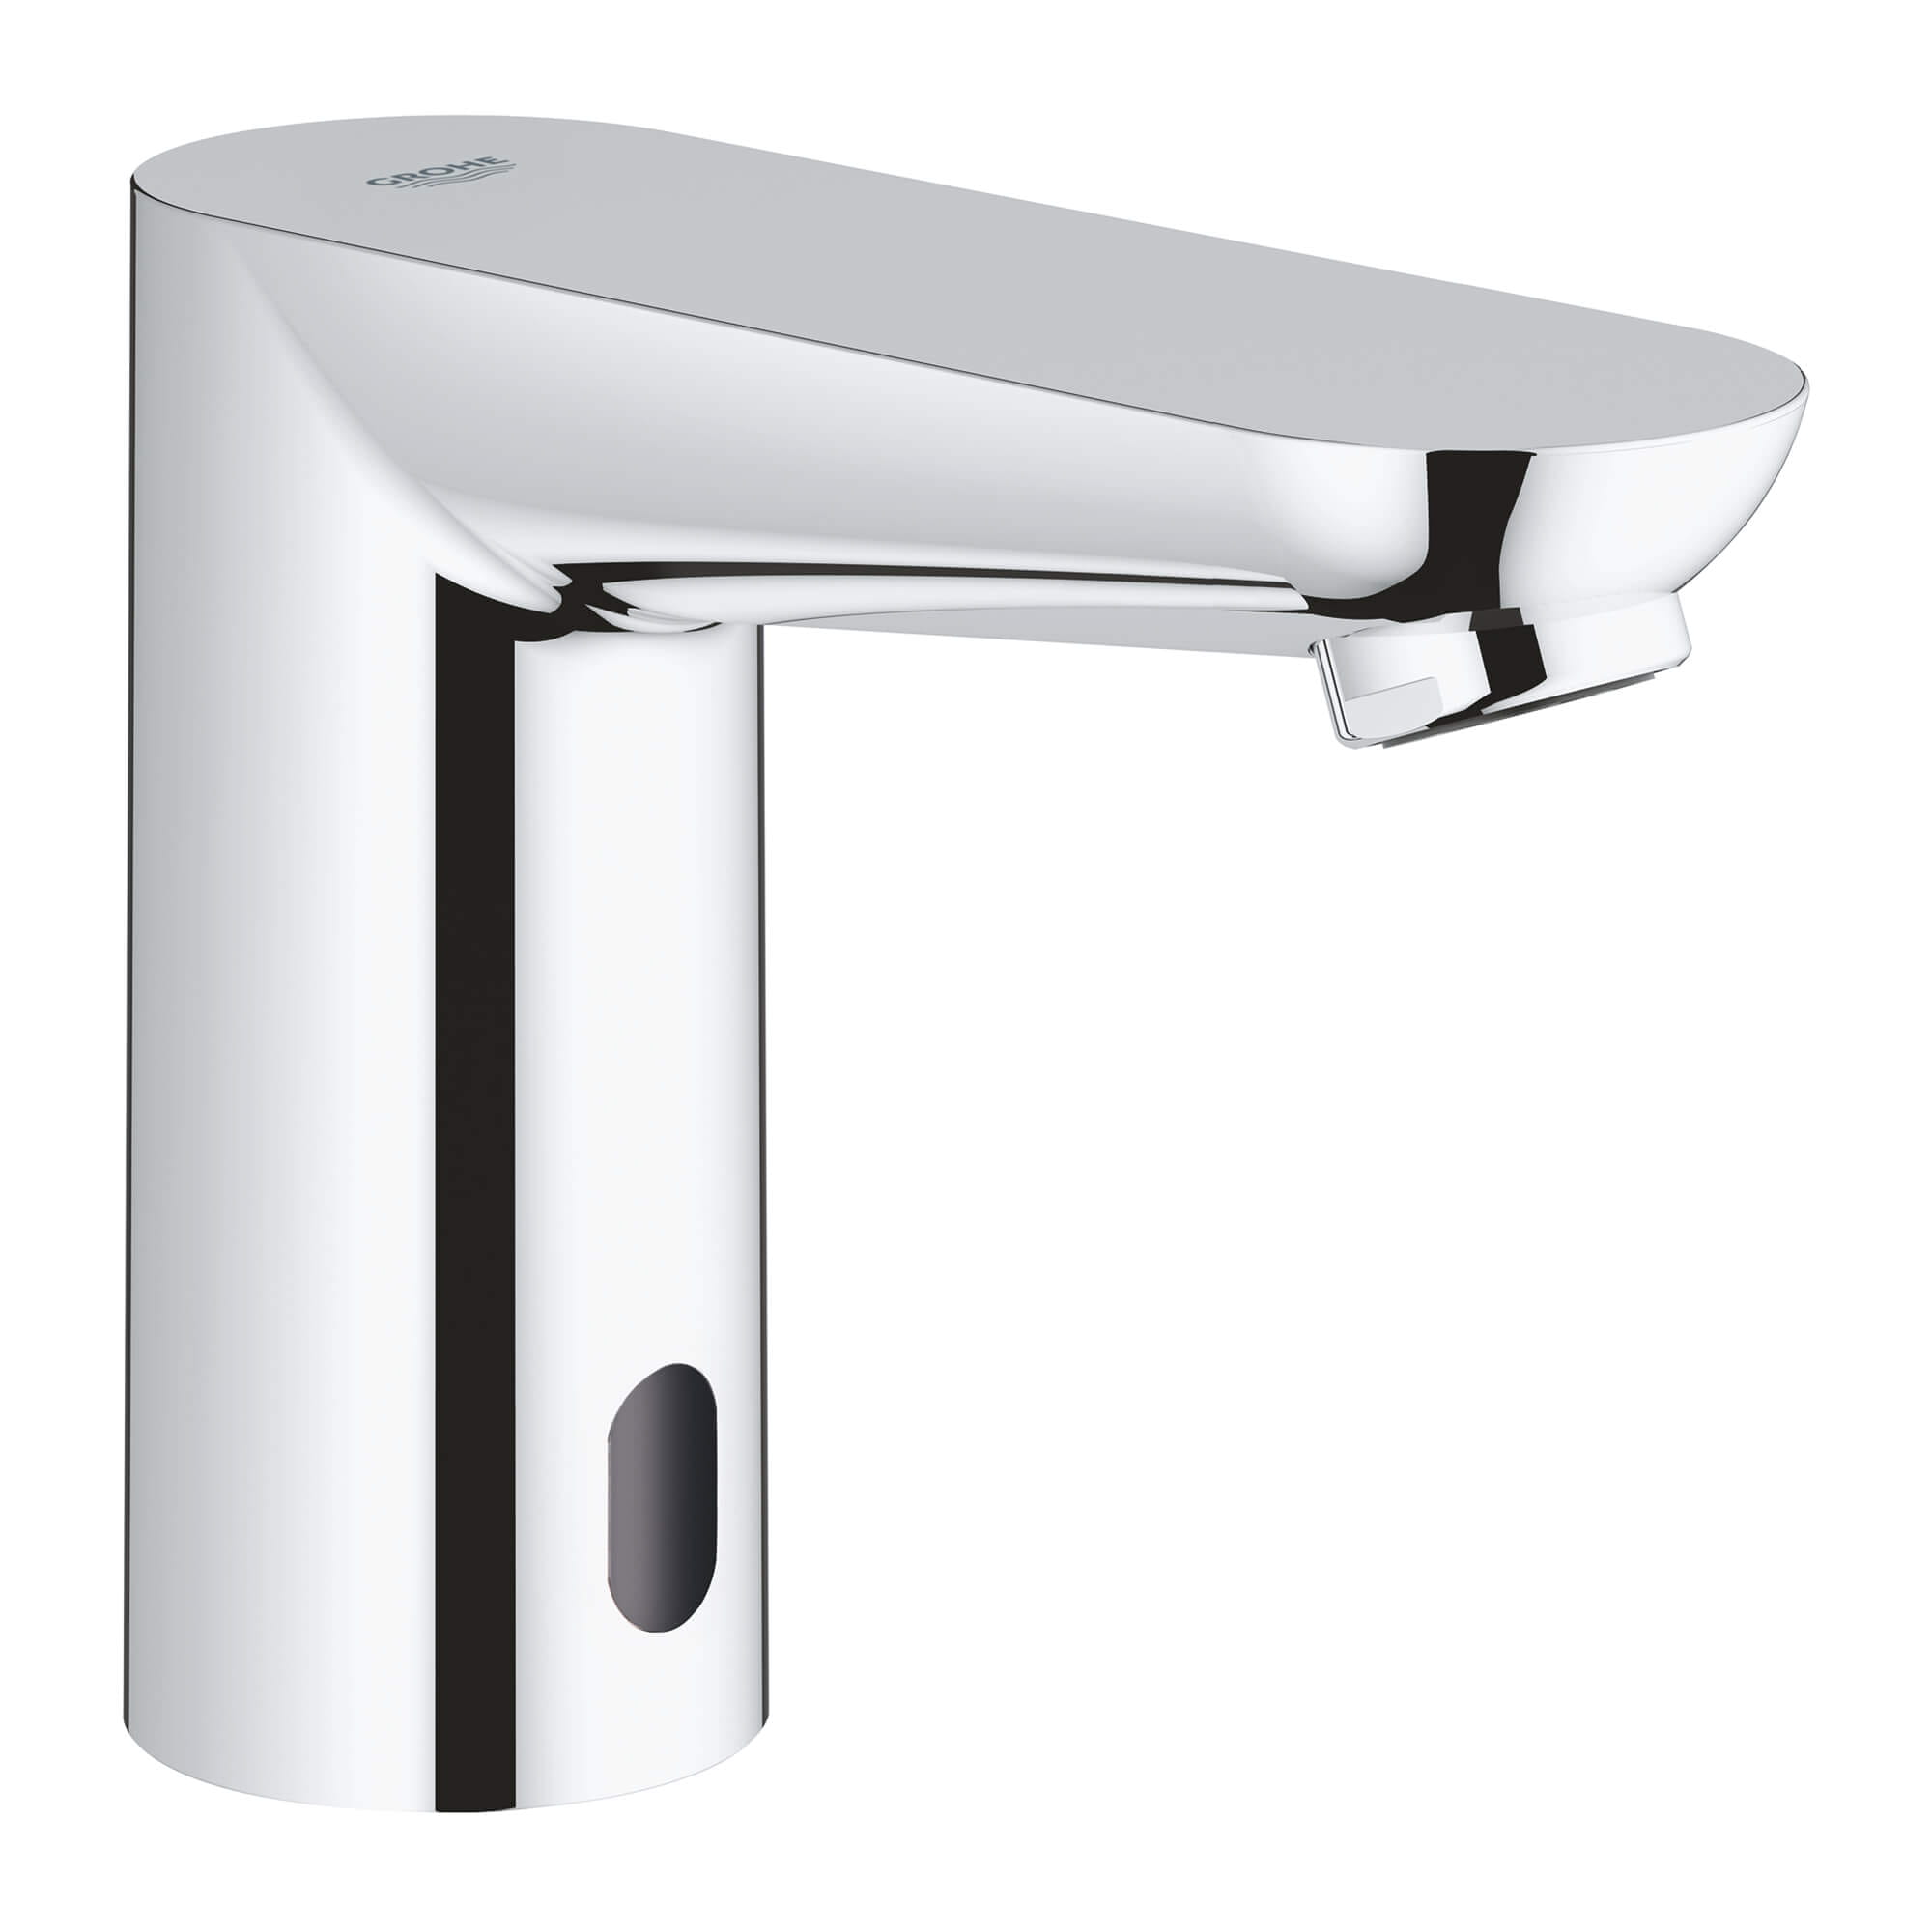 GROHE Grohe Eurosmart Basin Faucet White/Gold Mixer Tap Water Tap 